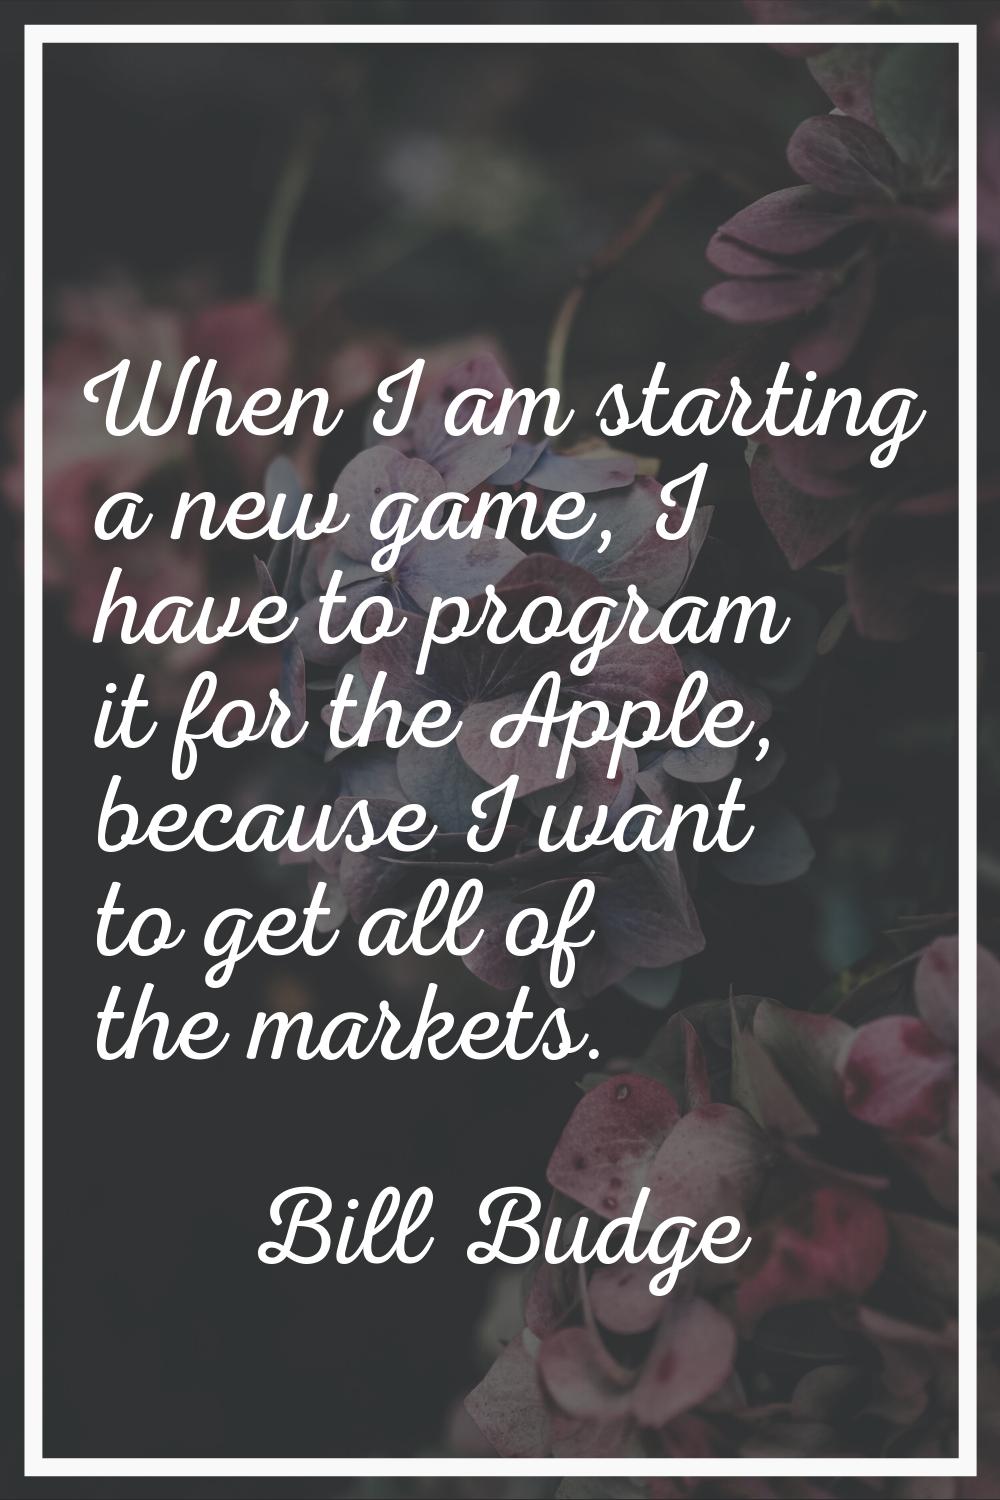 When I am starting a new game, I have to program it for the Apple, because I want to get all of the